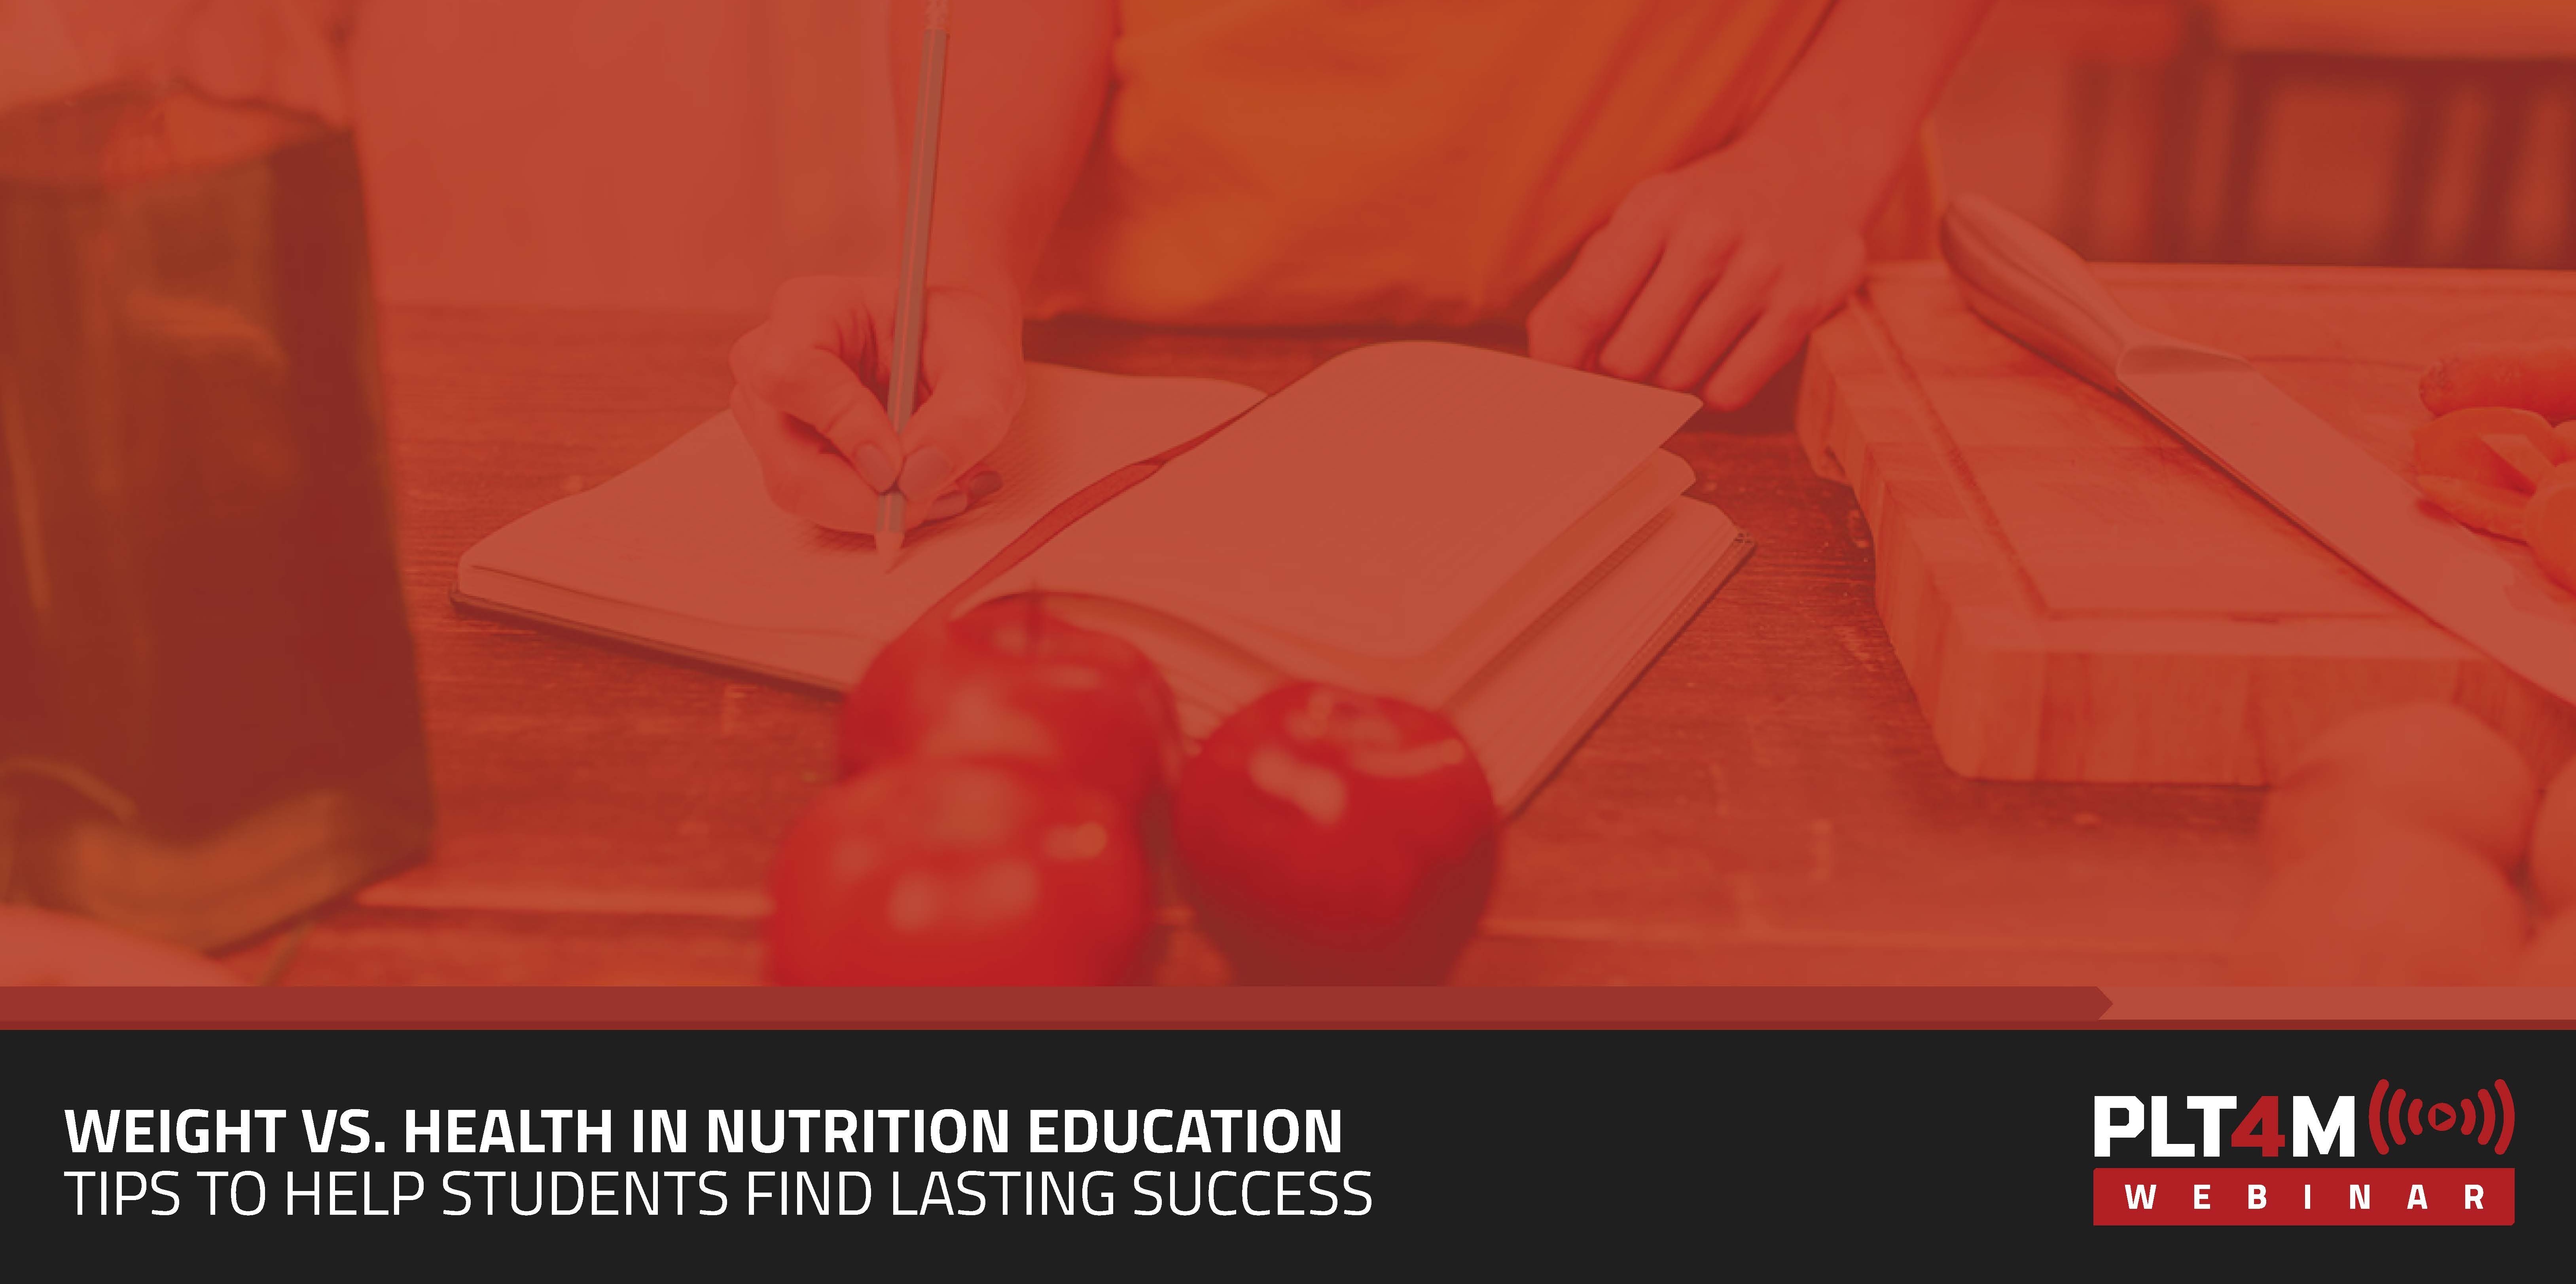 Weight vs. Health in Nutrition Education